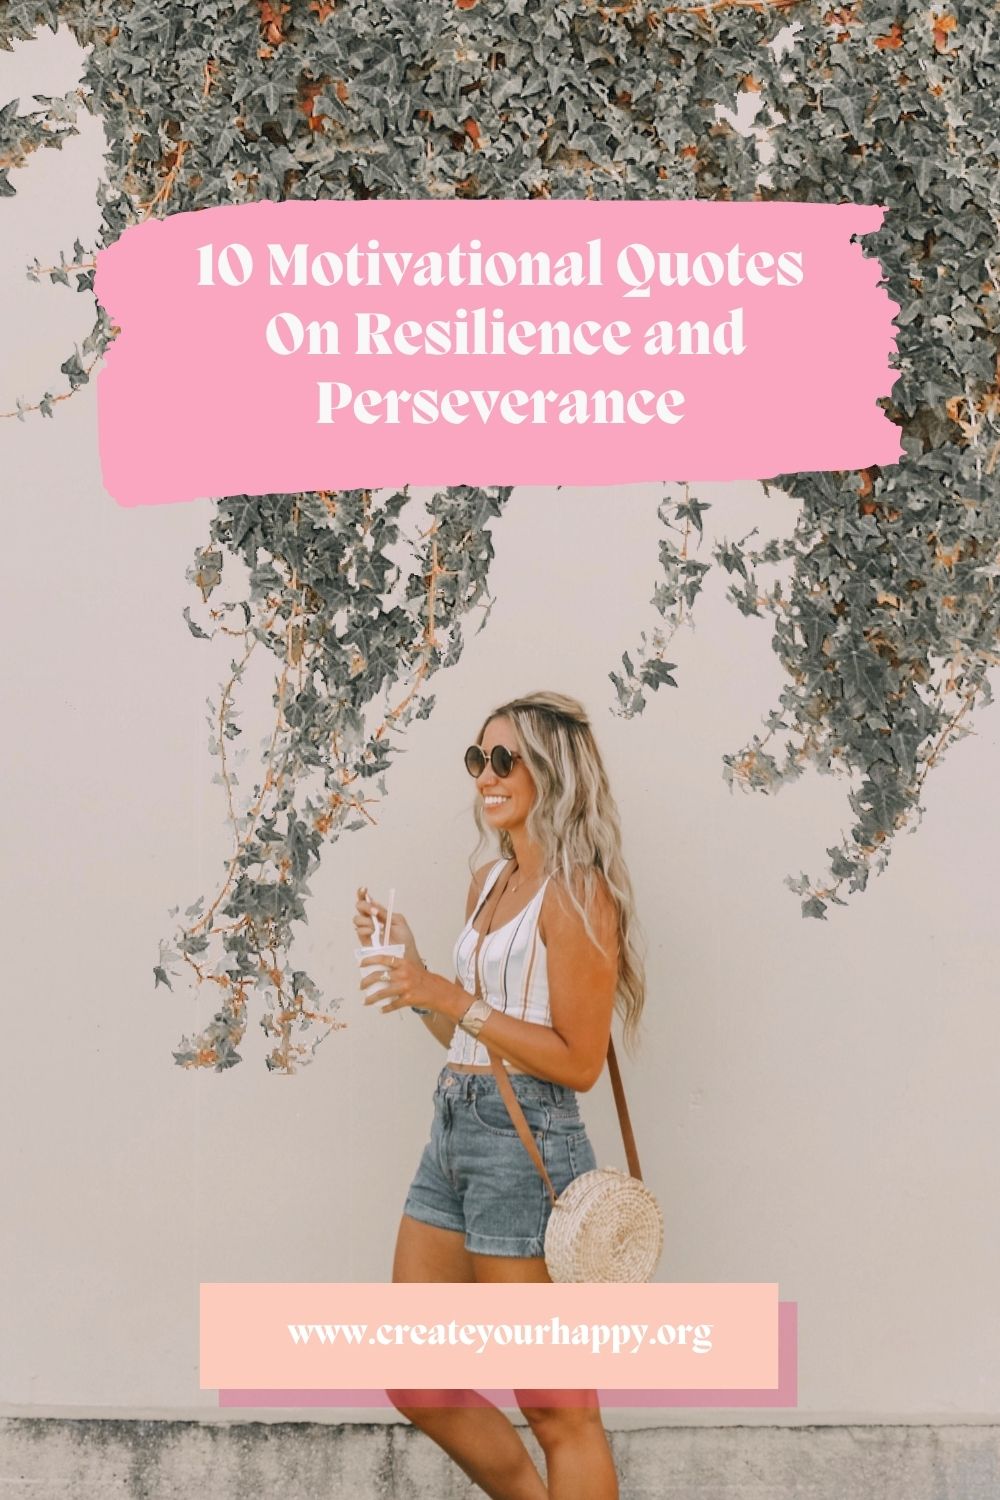 10 Motivational Quotes On Resilience and Perseverance